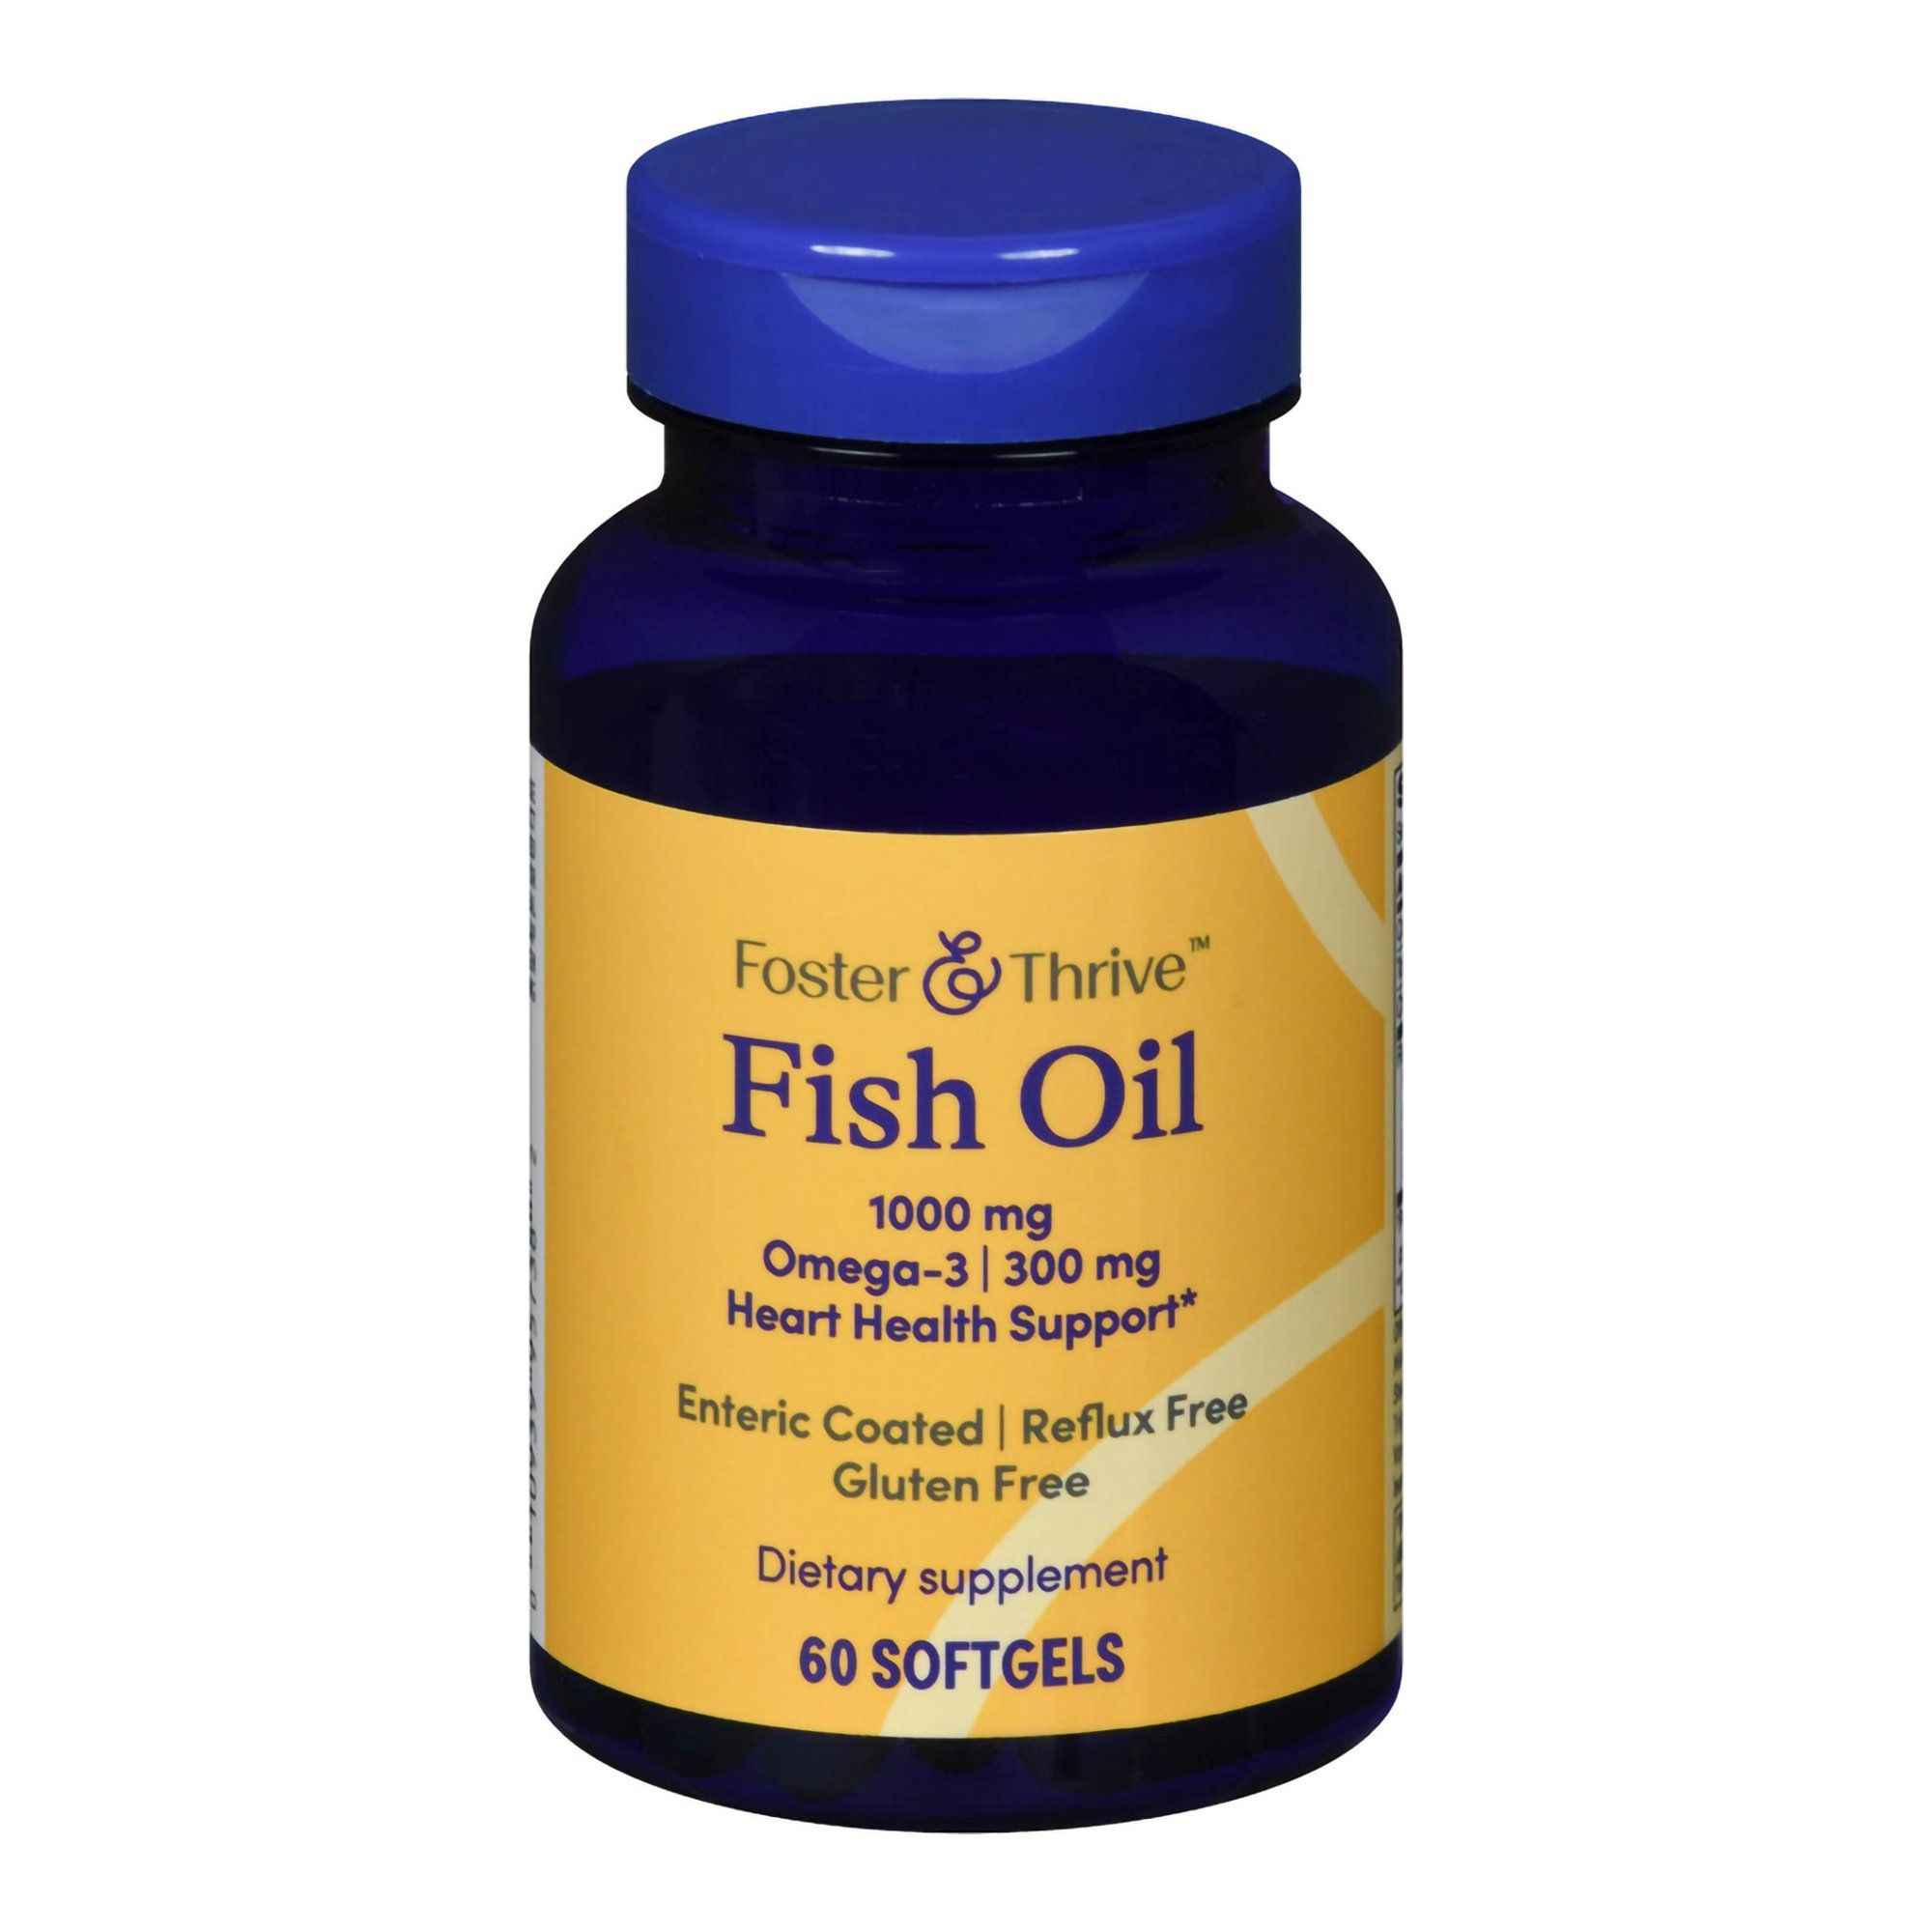 Foster & Thrive Fish Oil Softgel, 1000 mg  - 60 ct